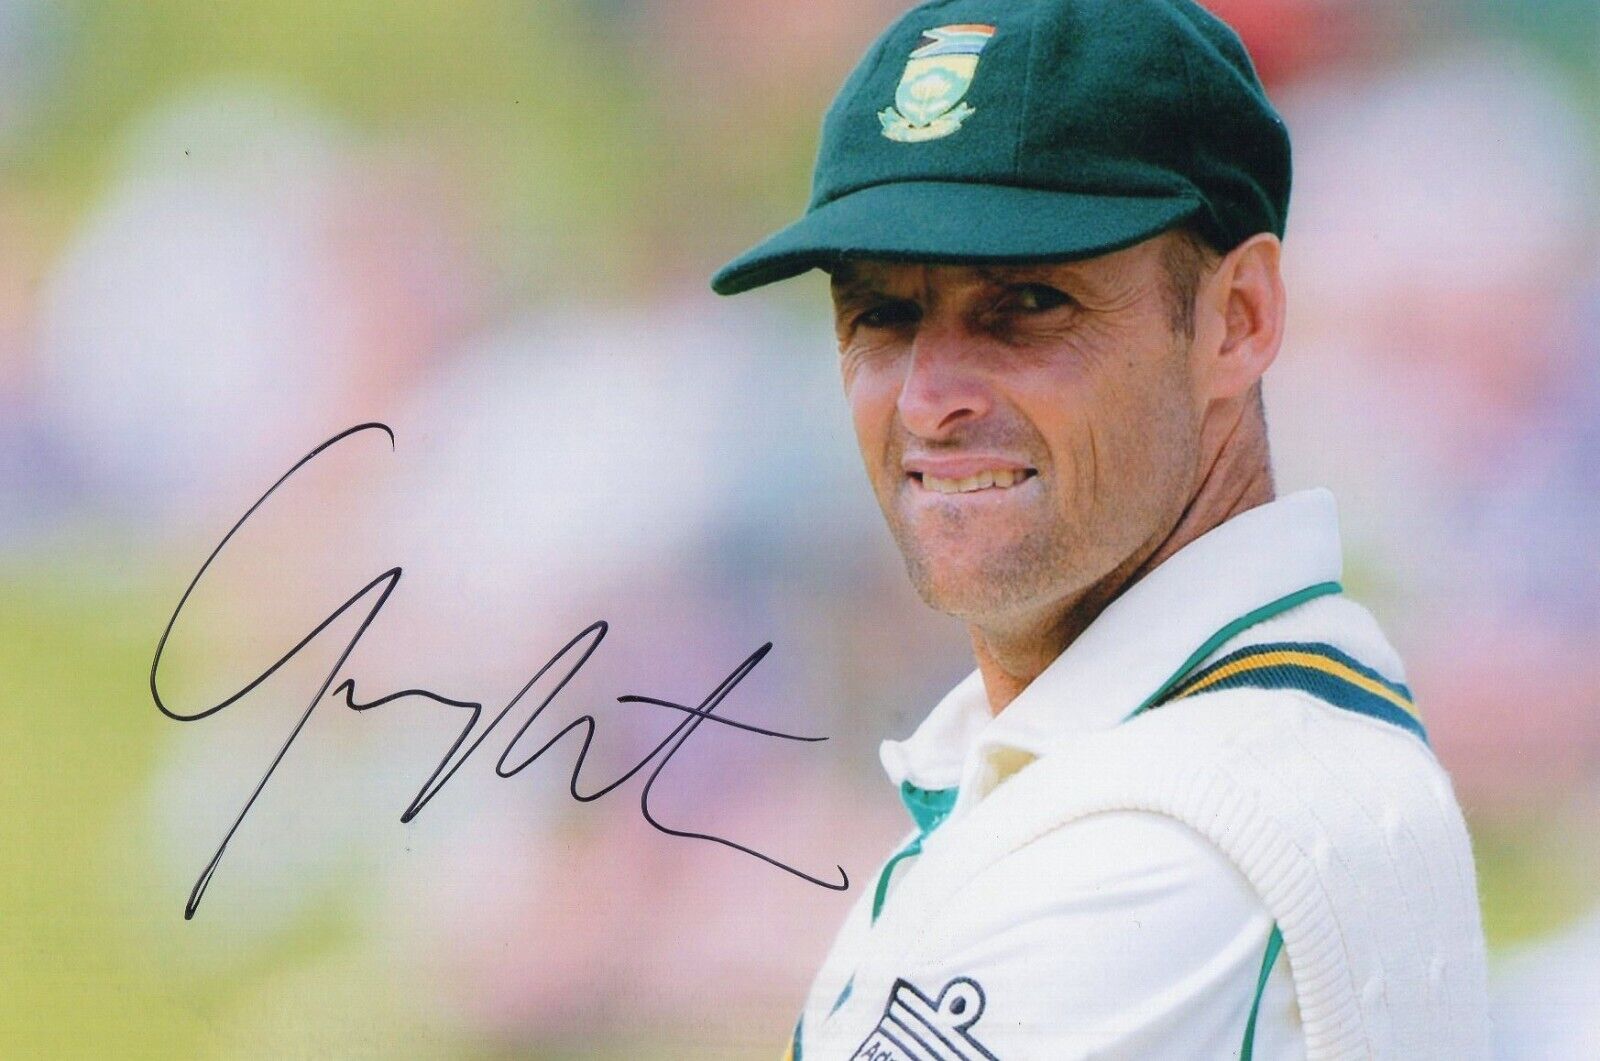 4x6 Original Autographed Photo of Former South African Cricketer Gary Kirsten